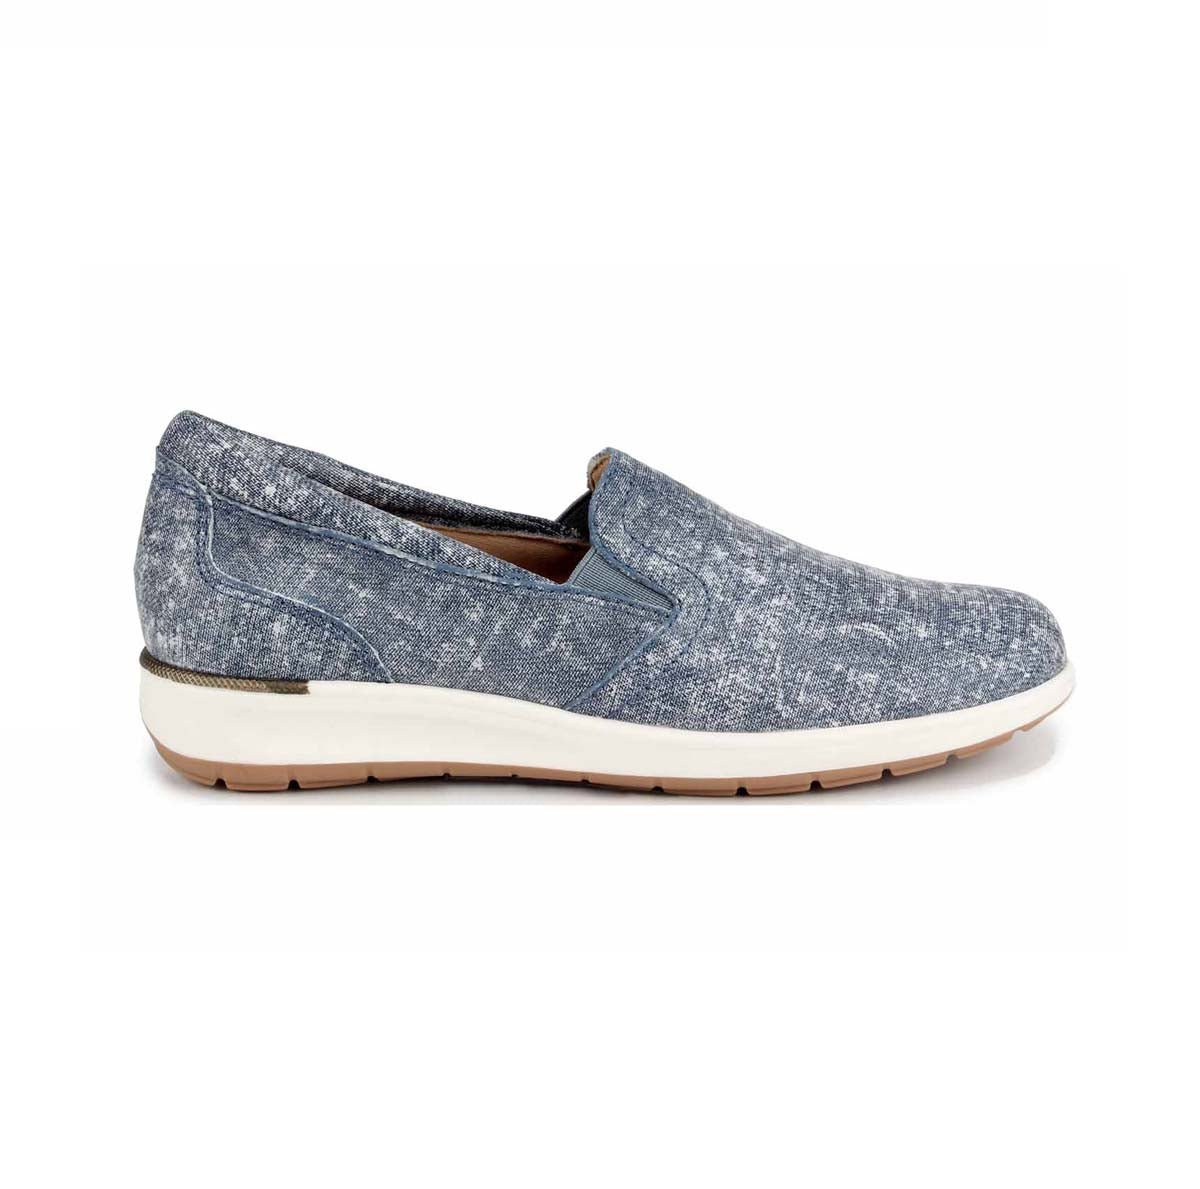 ROS HOMMERSON ORLEANS WOMEN'S SLIP-ON CASUAL SNEAKER IN DENIM PRINT - TLW Shoes